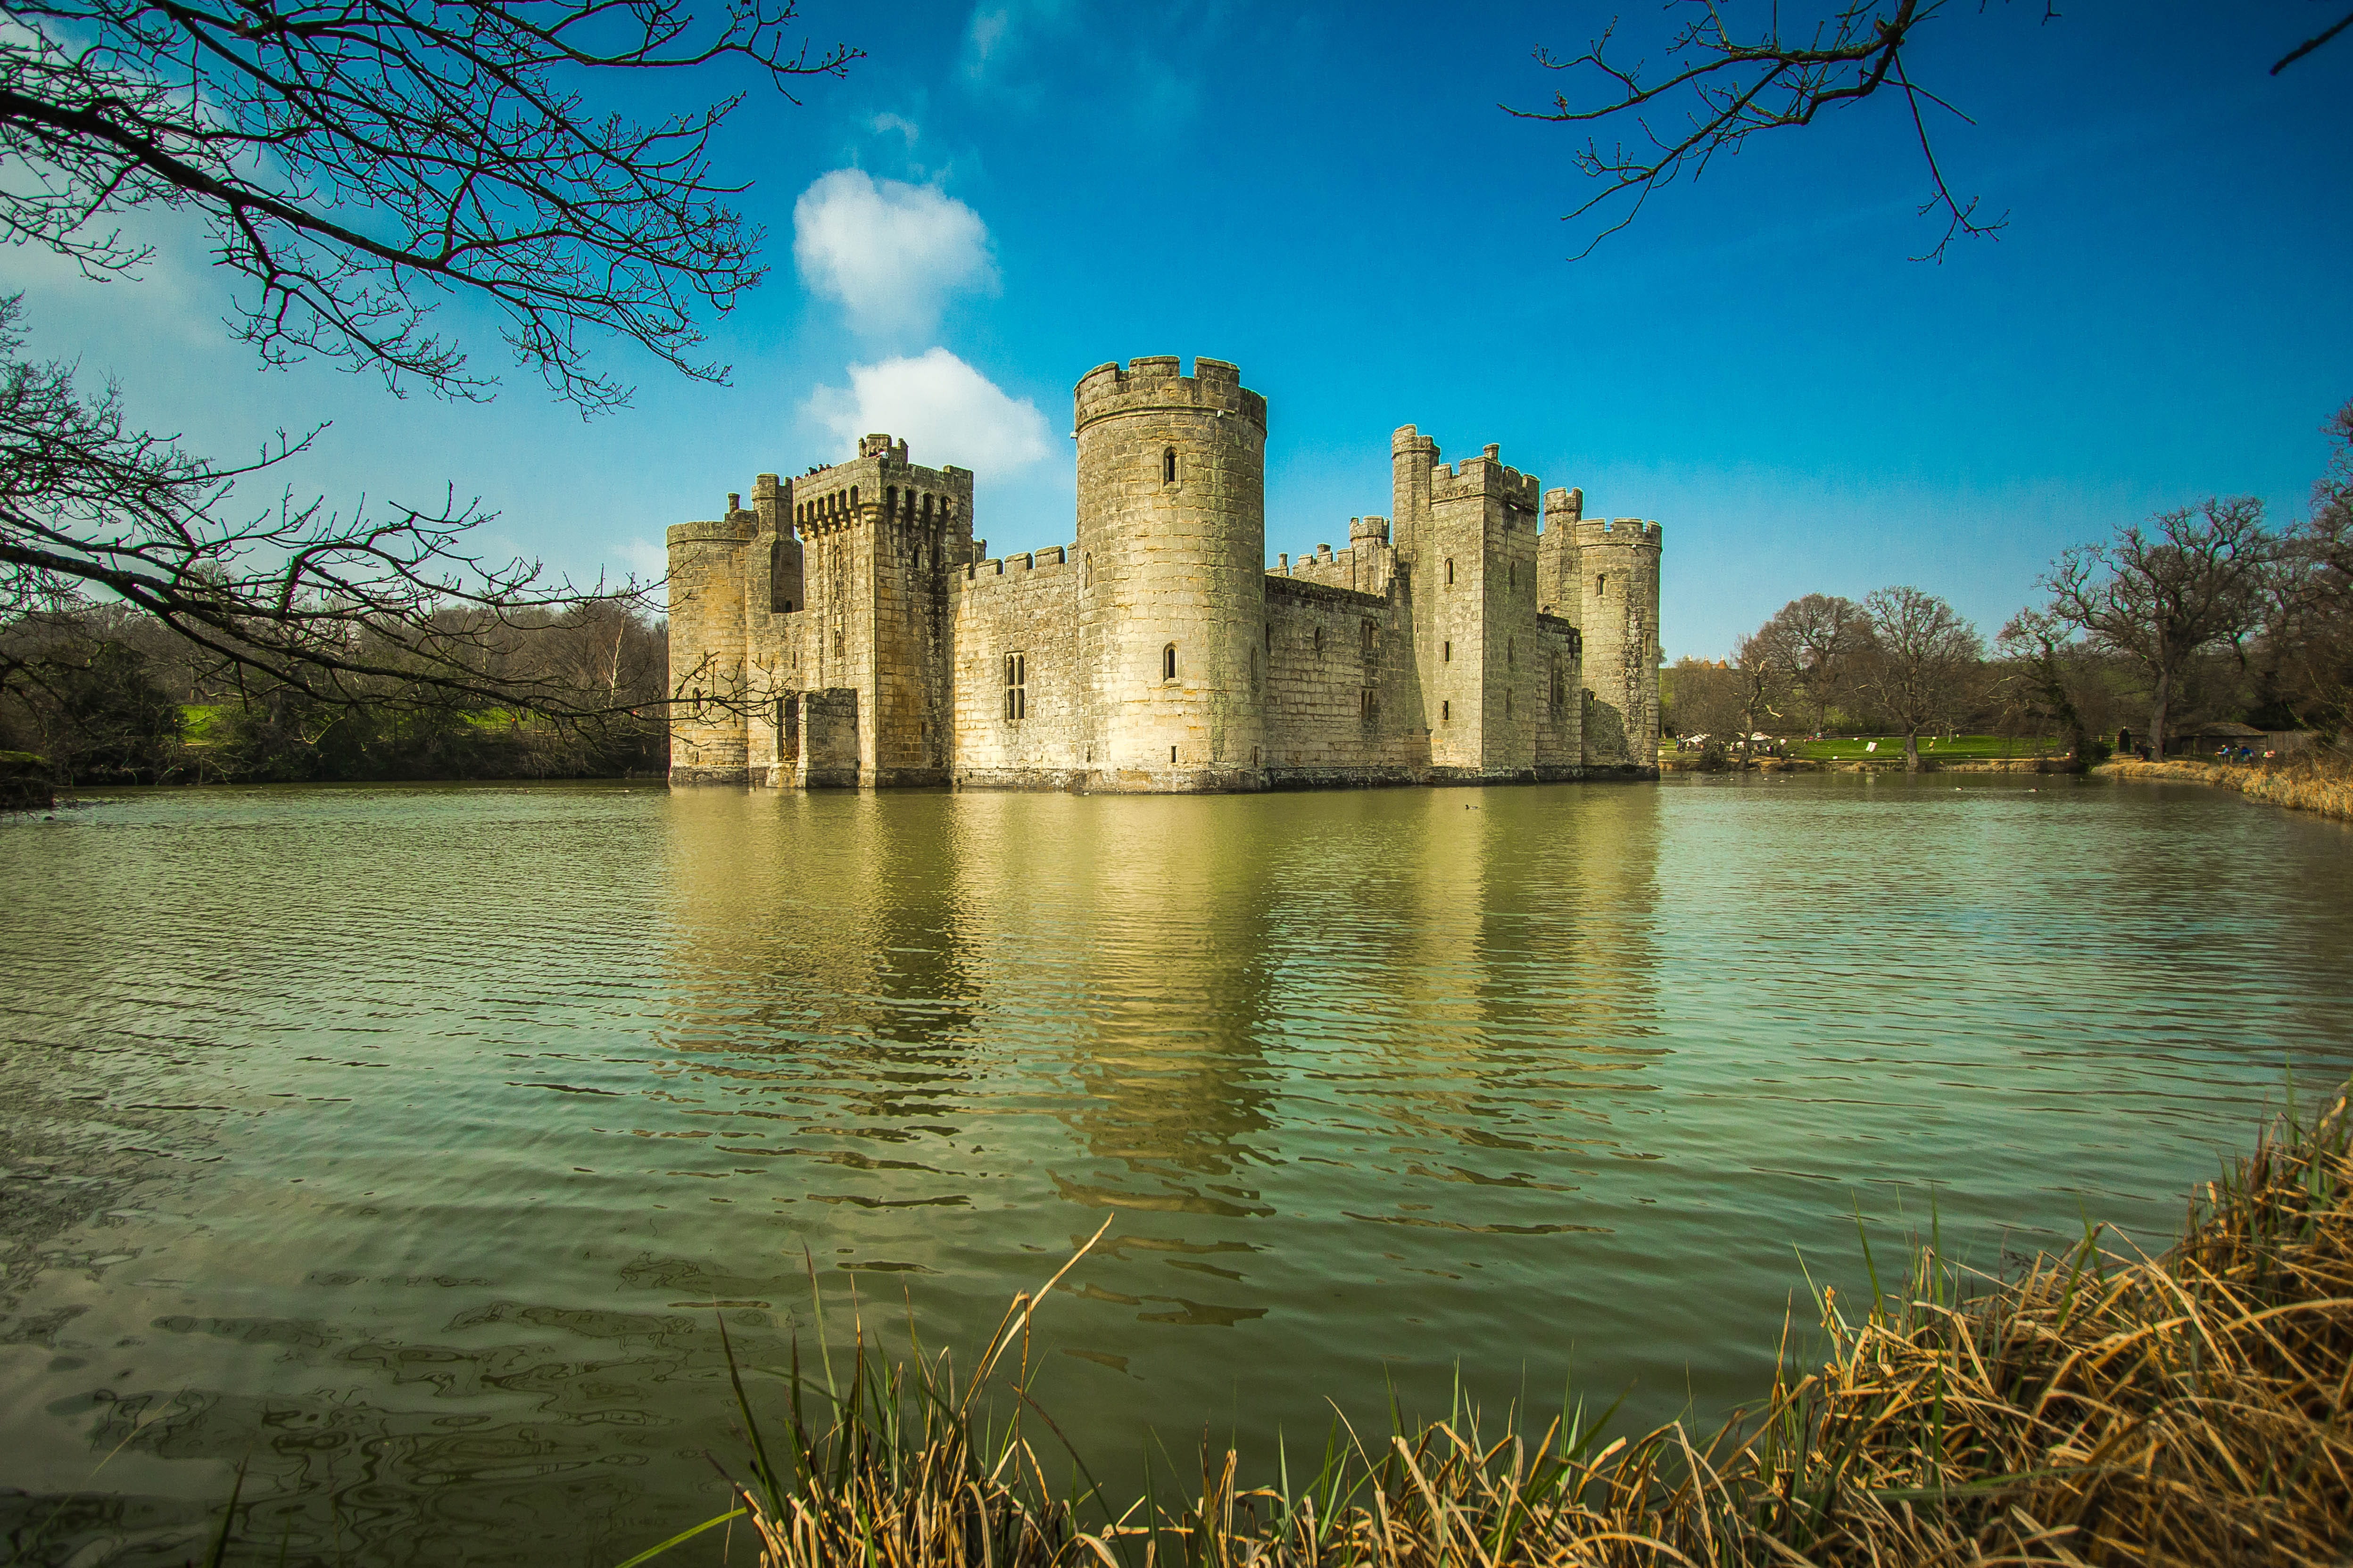 castle in the body of water, bodiam castle, lake, monument, england